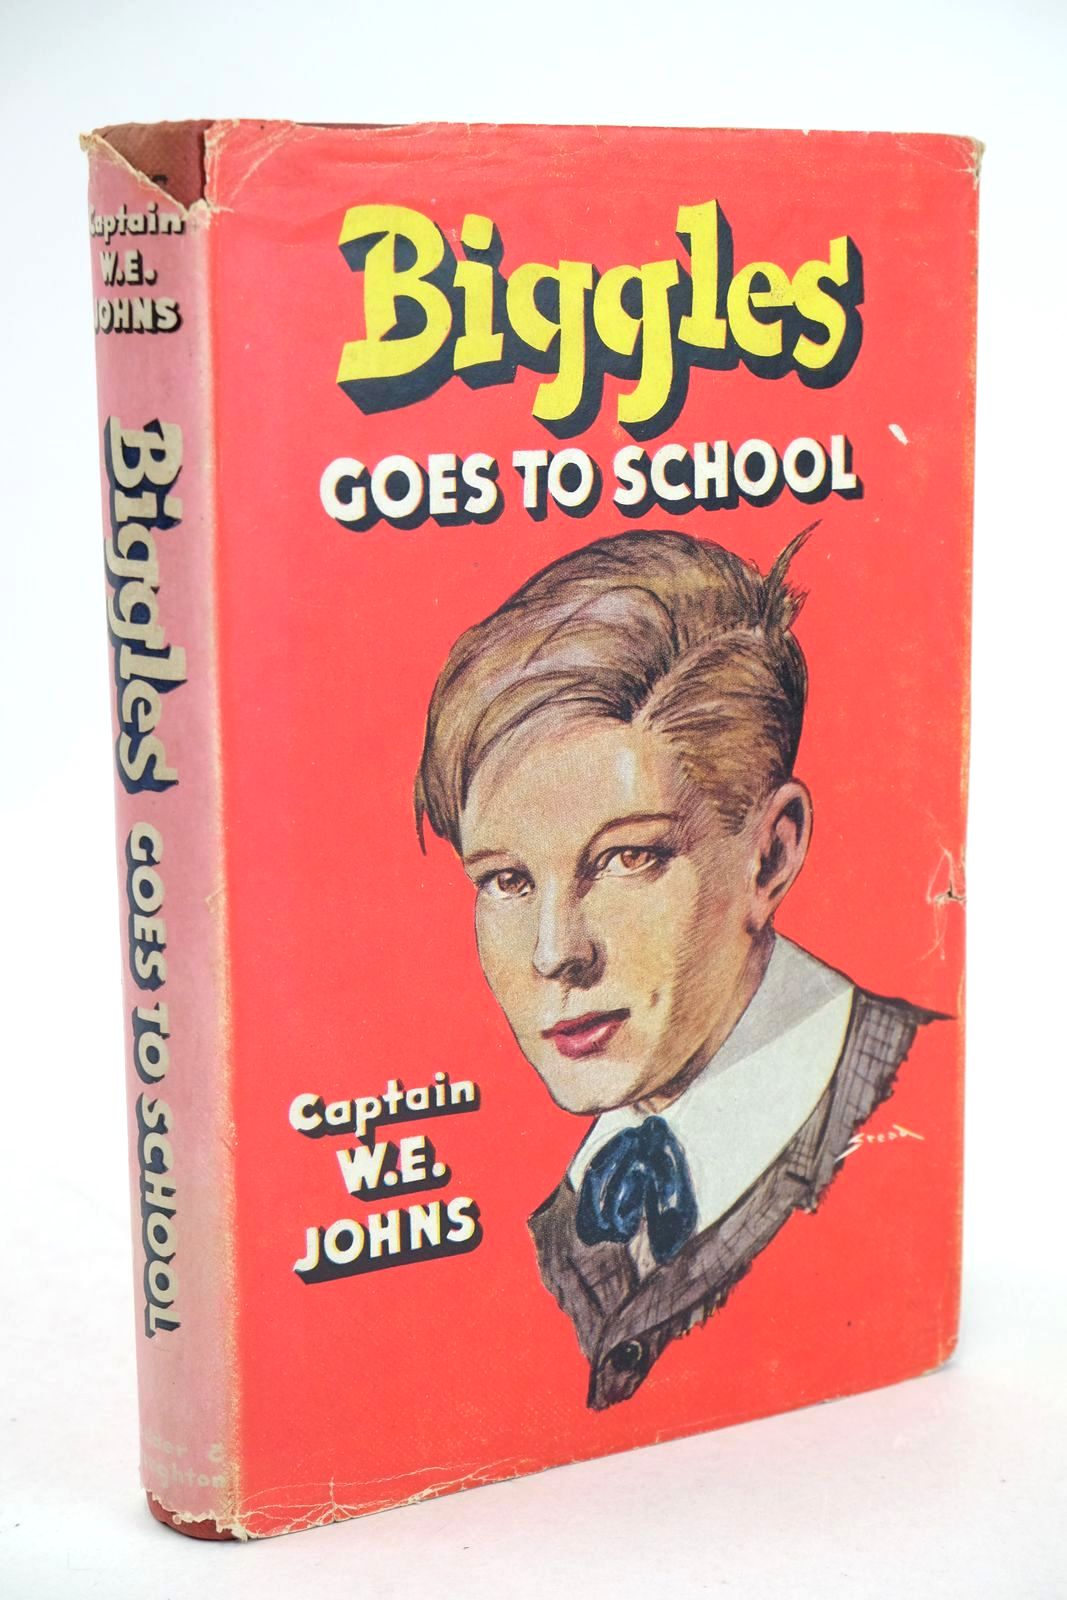 Photo of BIGGLES GOES TO SCHOOL written by Johns, W.E. illustrated by Stead,  published by Hodder & Stoughton (STOCK CODE: 1326110)  for sale by Stella & Rose's Books